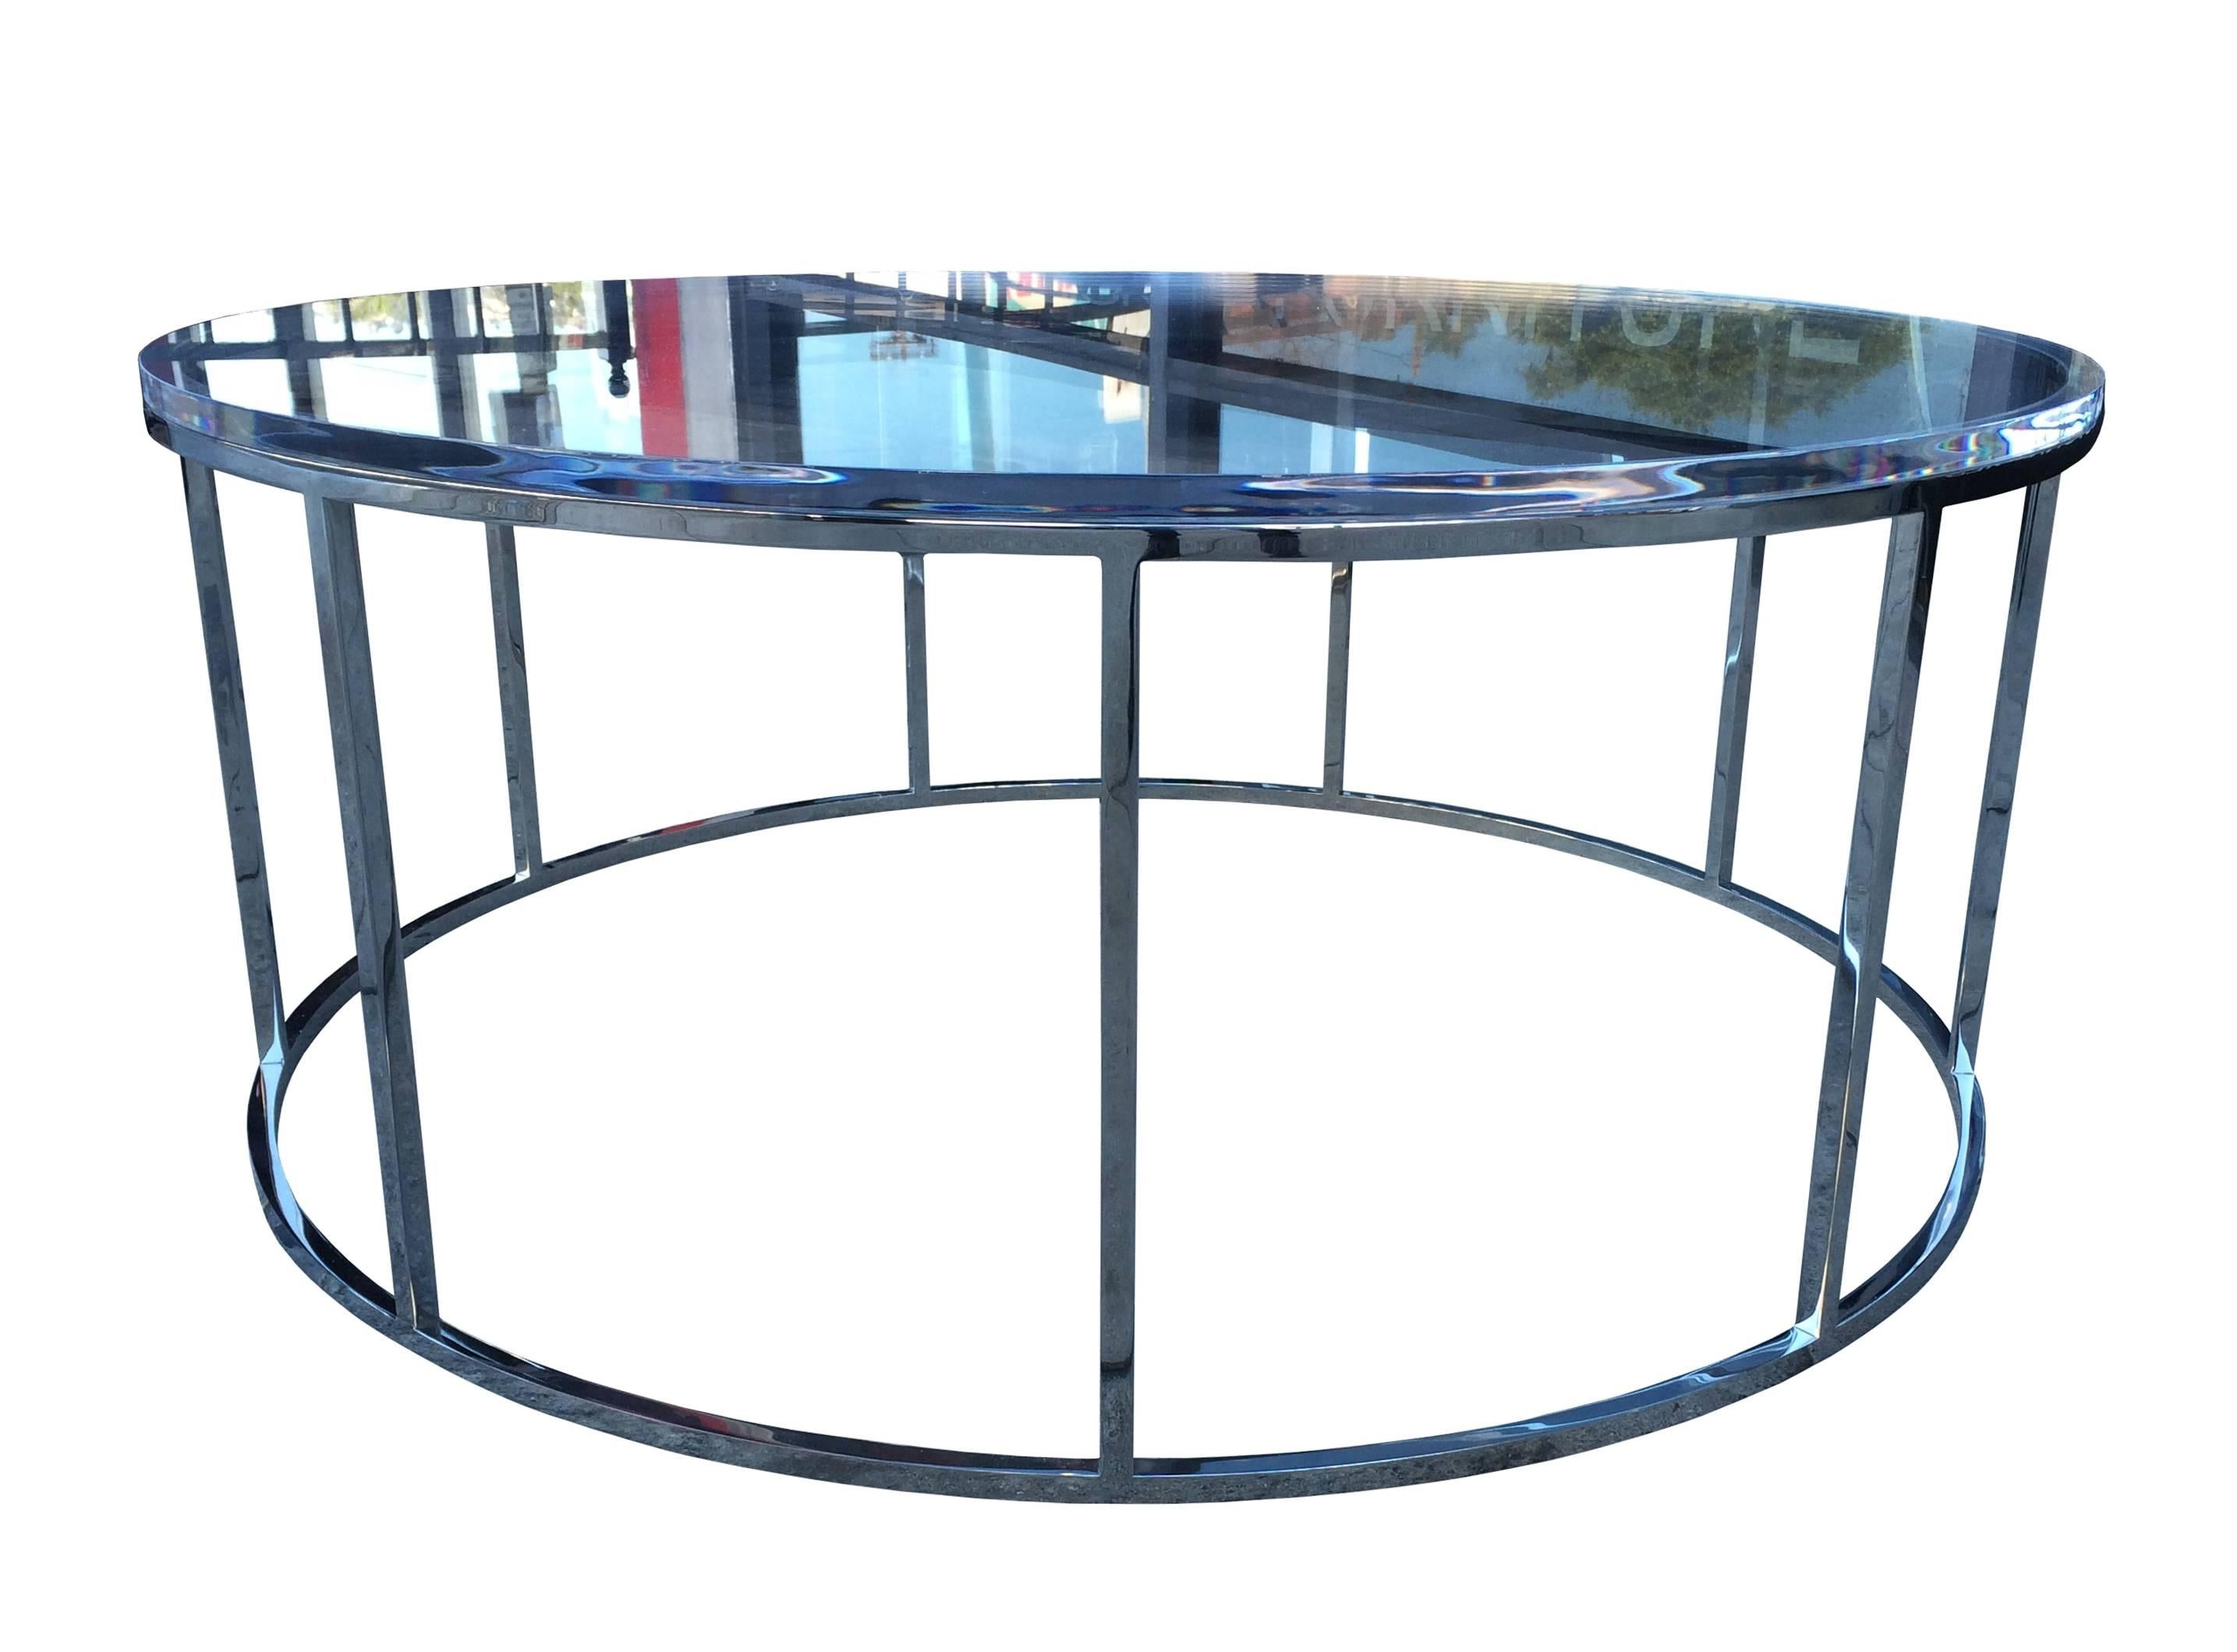 Minimalistic and whimsical style best describe this coffee table, executed in stainless steel with a high polished finish and topped with a 1